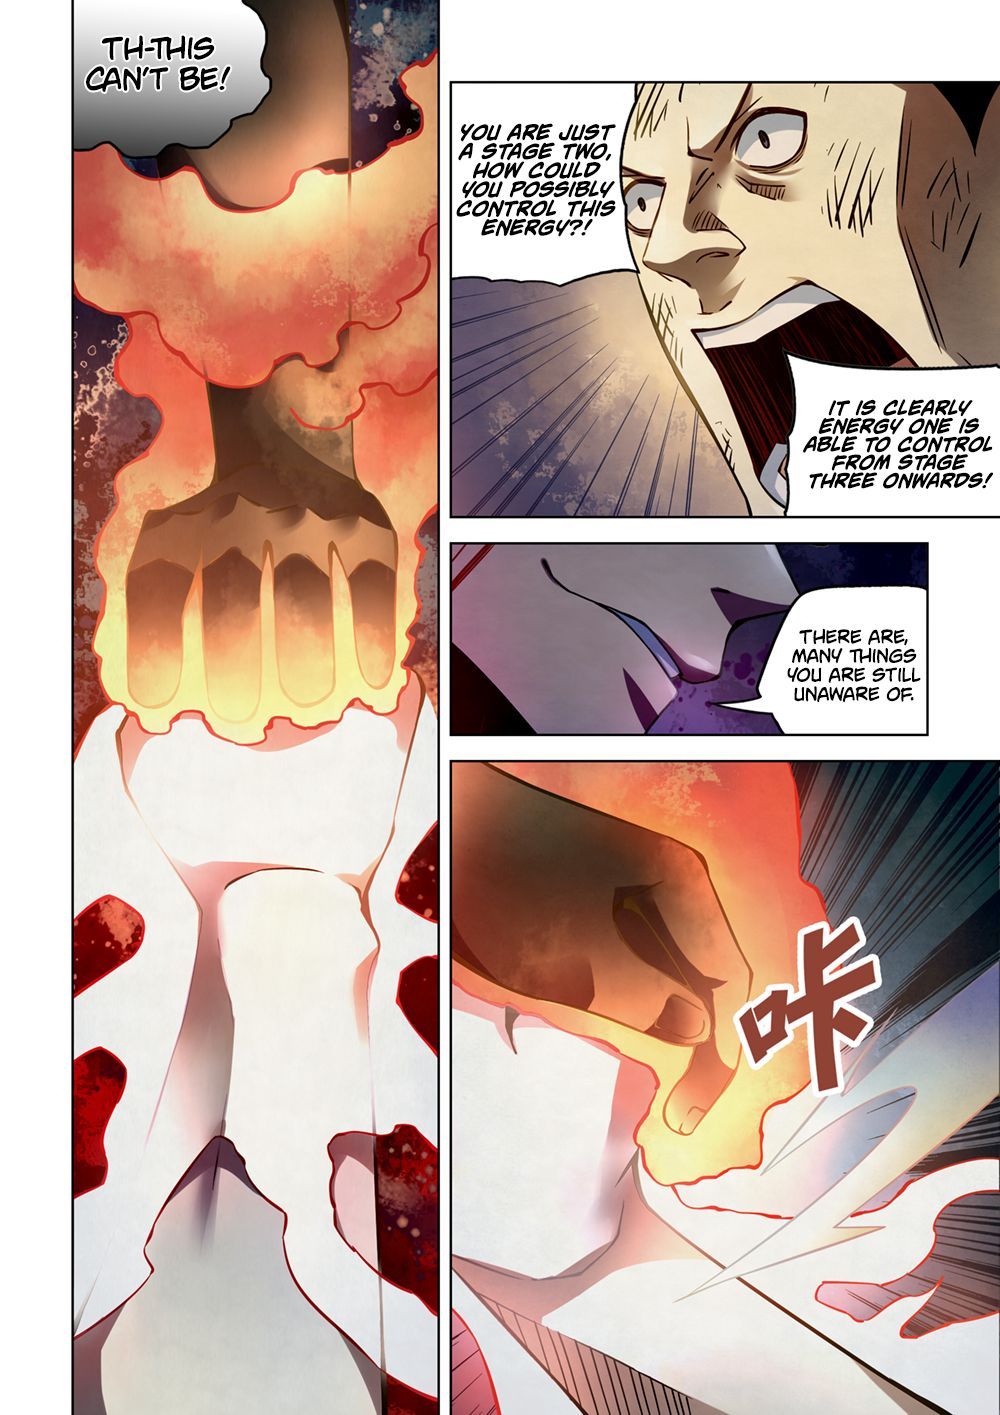 The Last Human Chapter 180 - Page 2